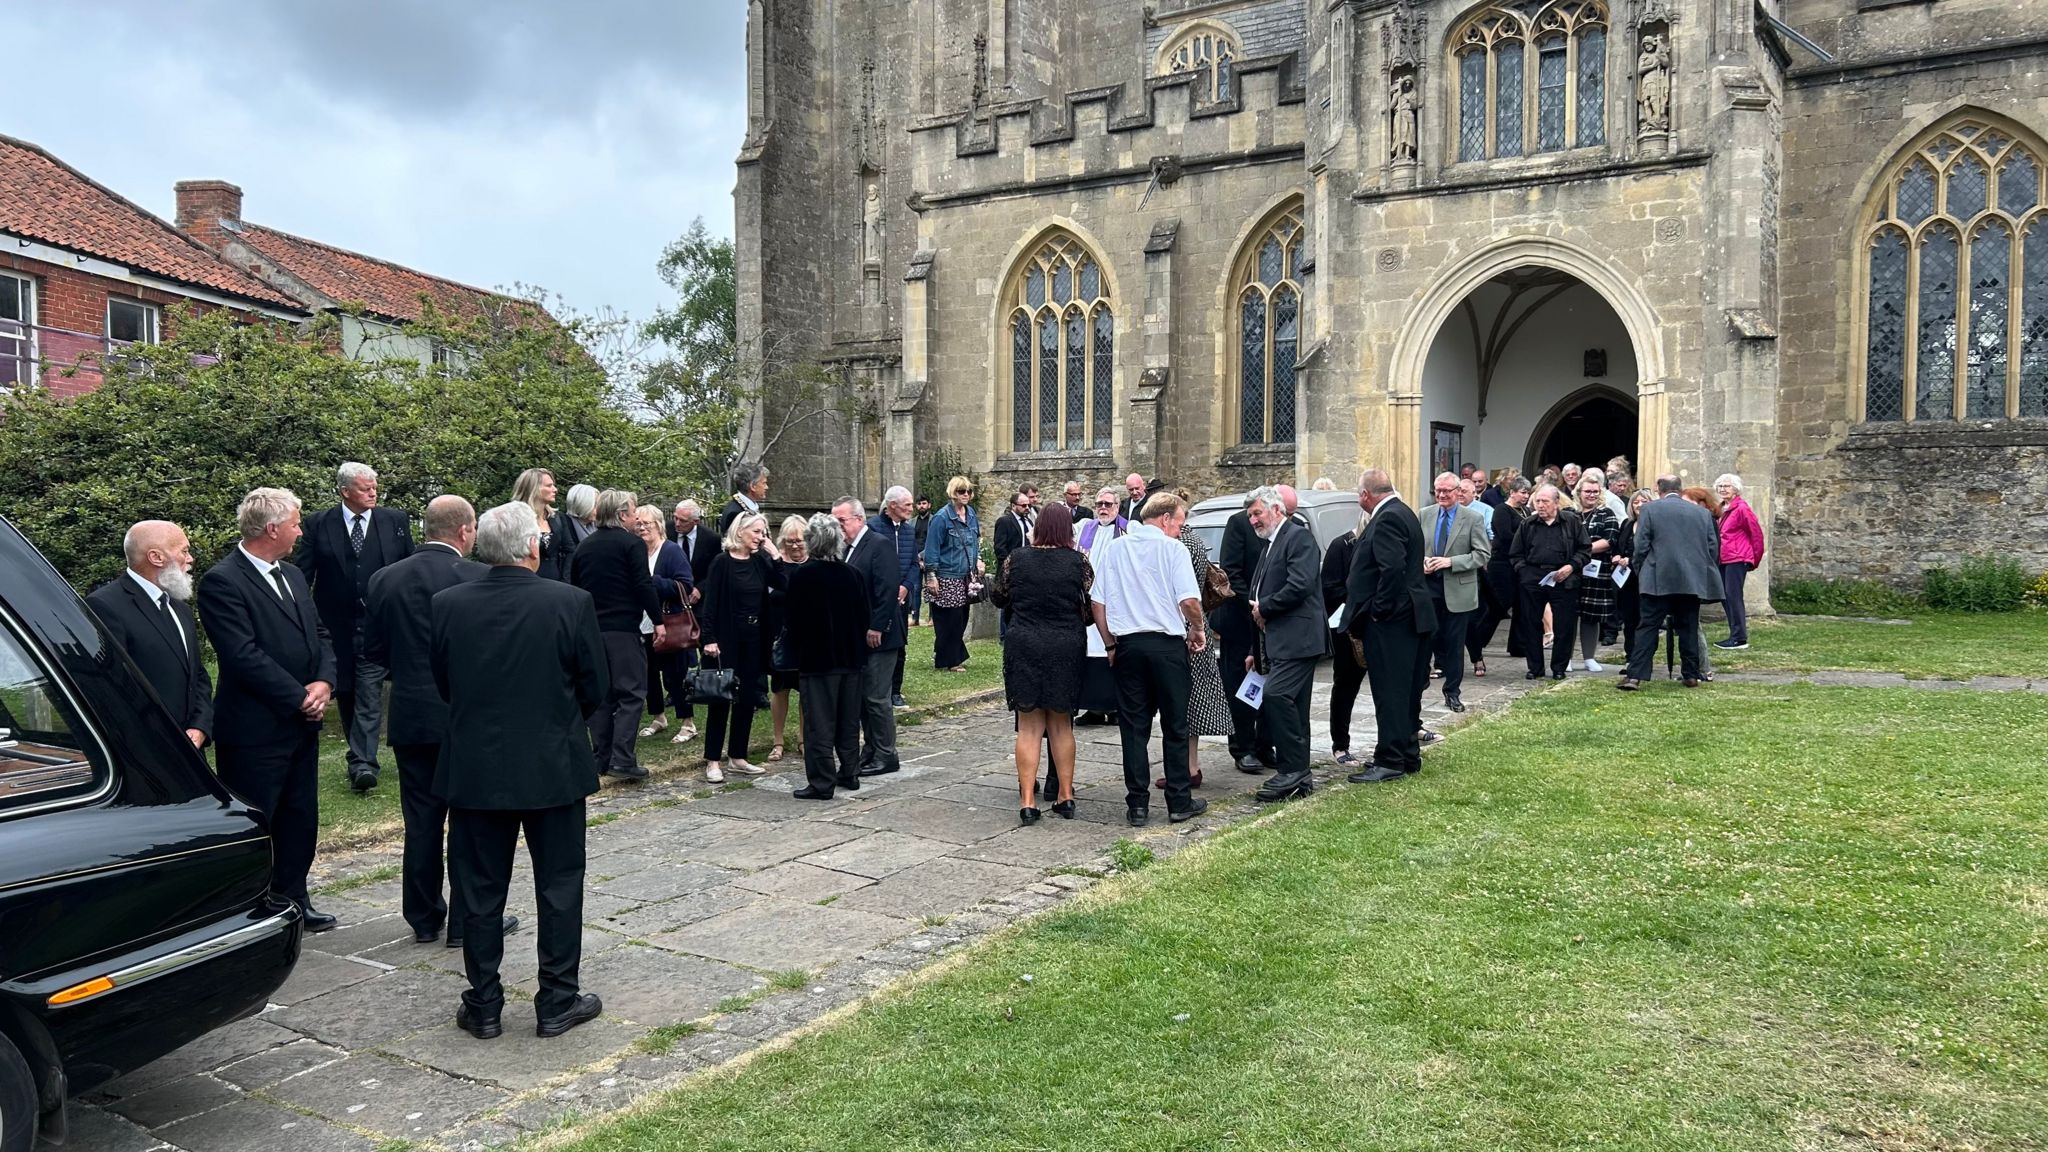 View outside the church before the funeral service